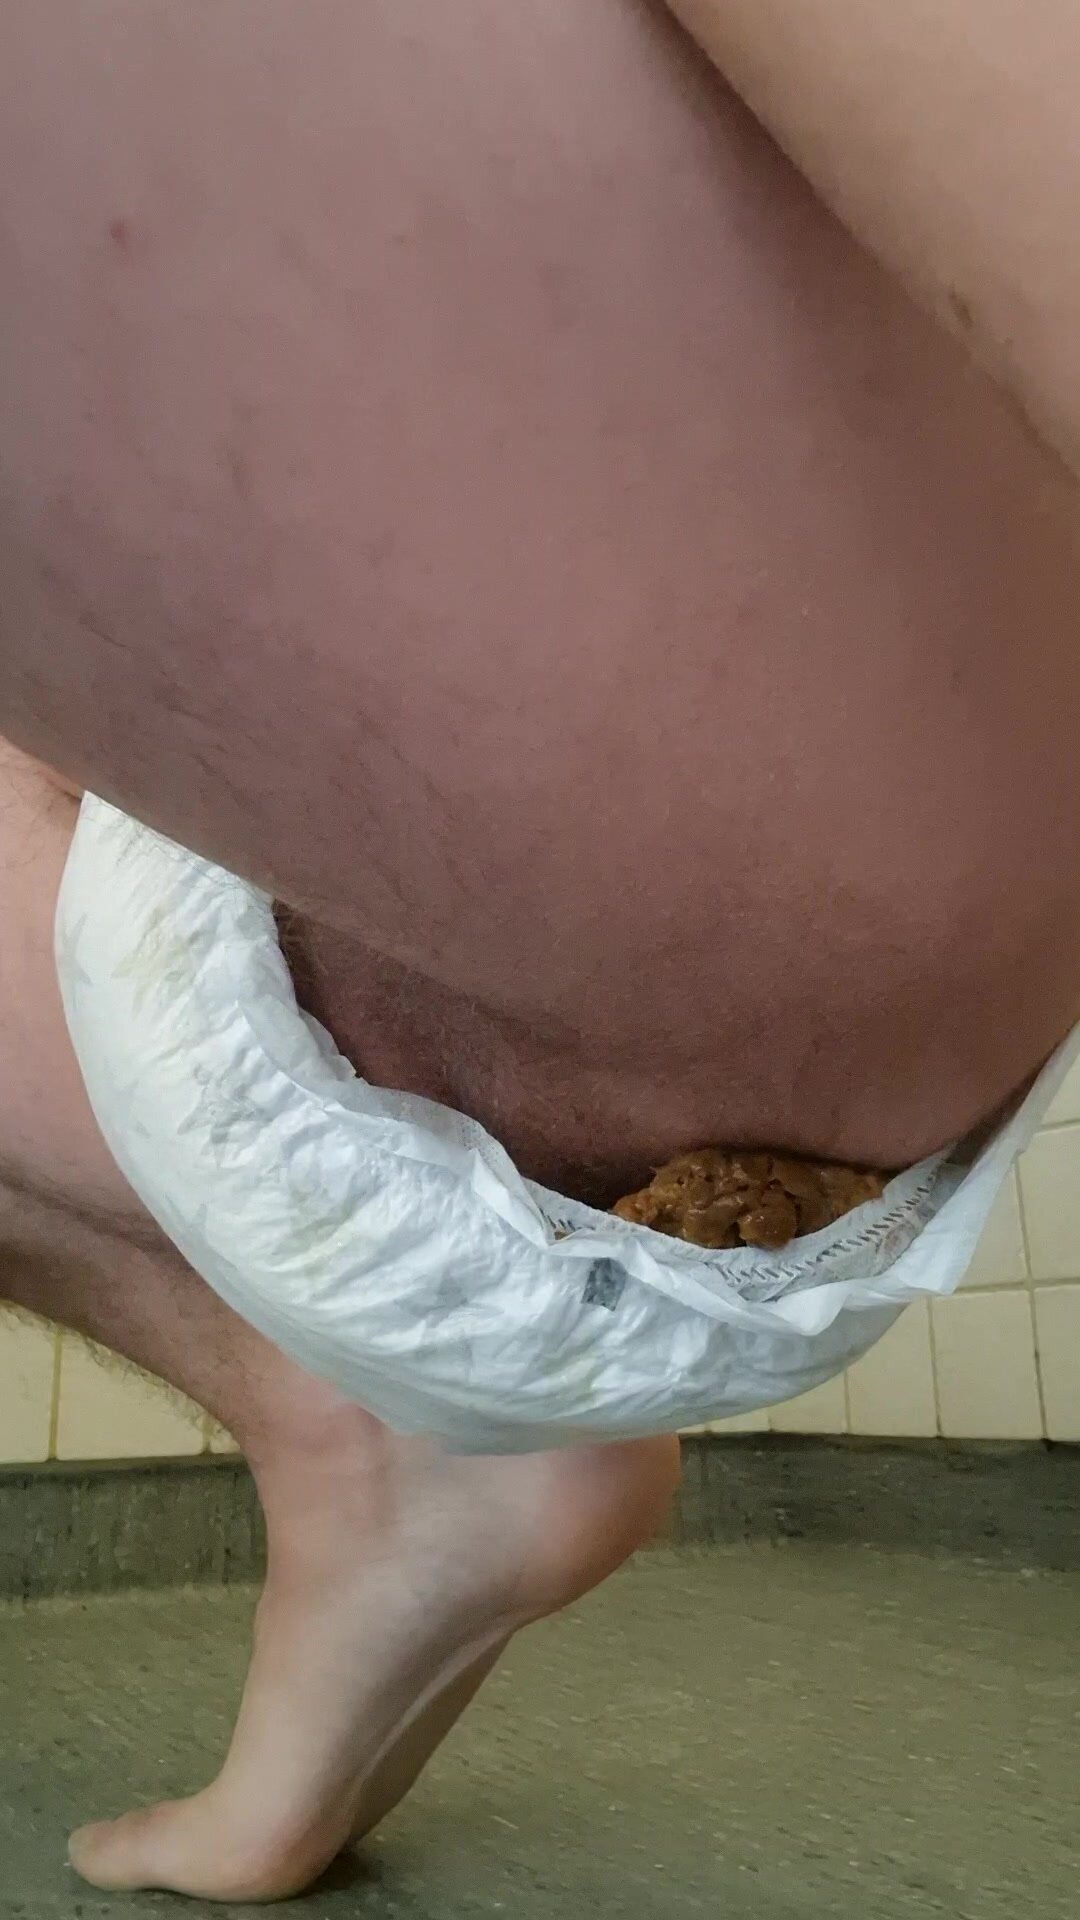 Side view of big diaper mess